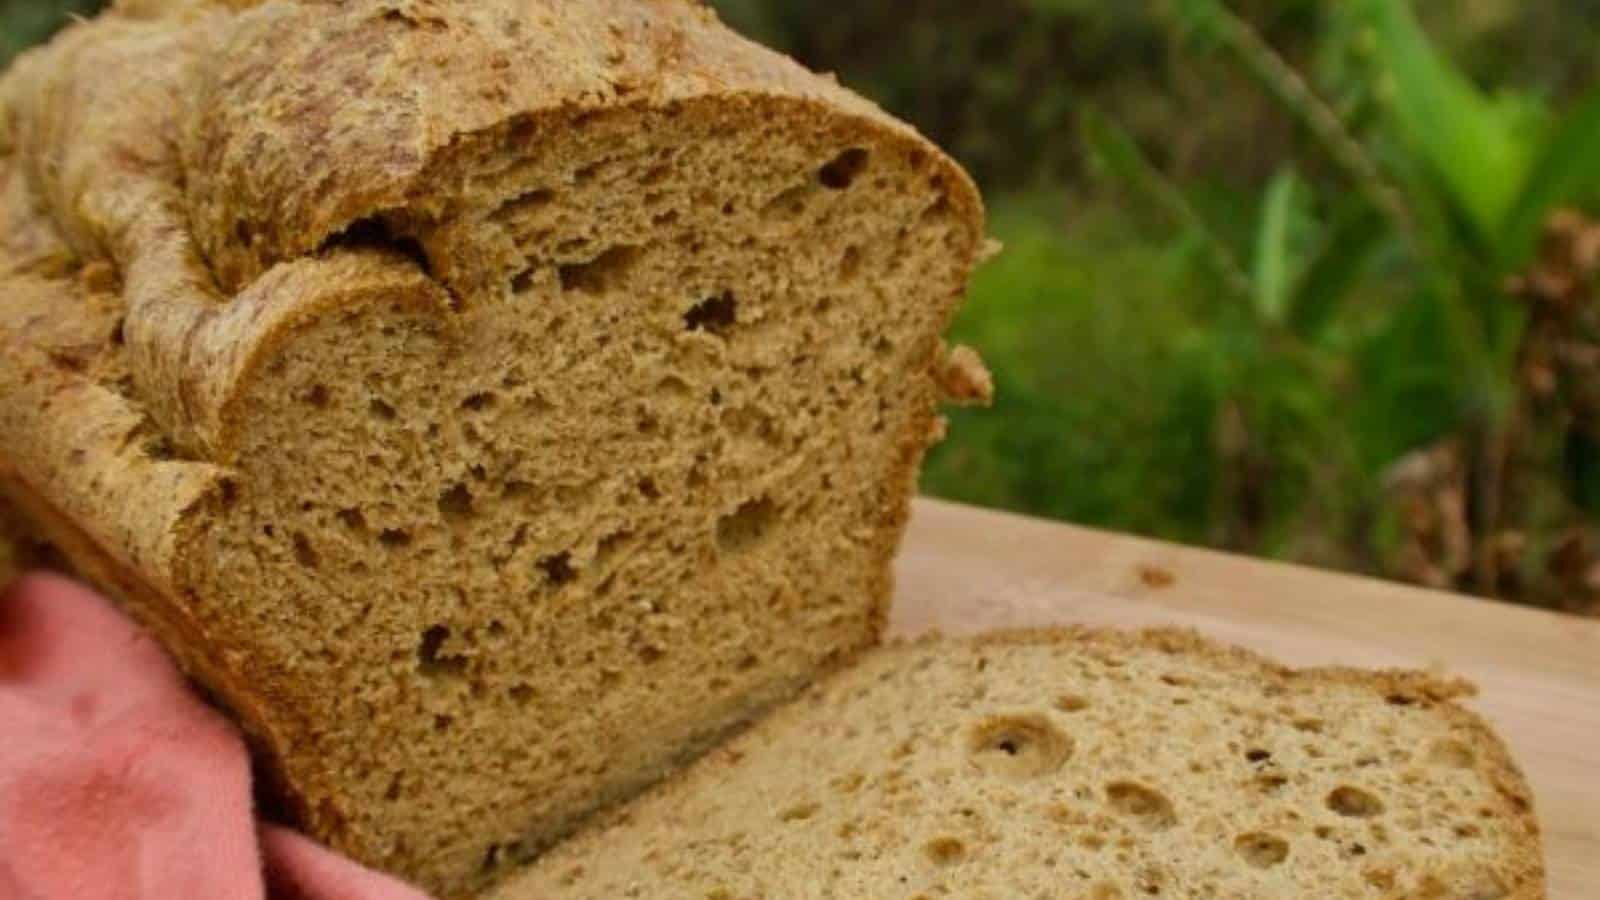 <p>Who said you have to give up bread? This low-carb bread gives you that satisfying crunch and taste without sabotaging your diet. It’s a great way to make sure that morning toast craving doesn’t derail you.<br><strong>Get the Recipe: </strong><a href="https://www.primaledgehealth.com/best-purpose-keto-bread/?utm_source=msn&utm_medium=page&utm_campaign=msn">The Best Low-Carb Bread</a></p>